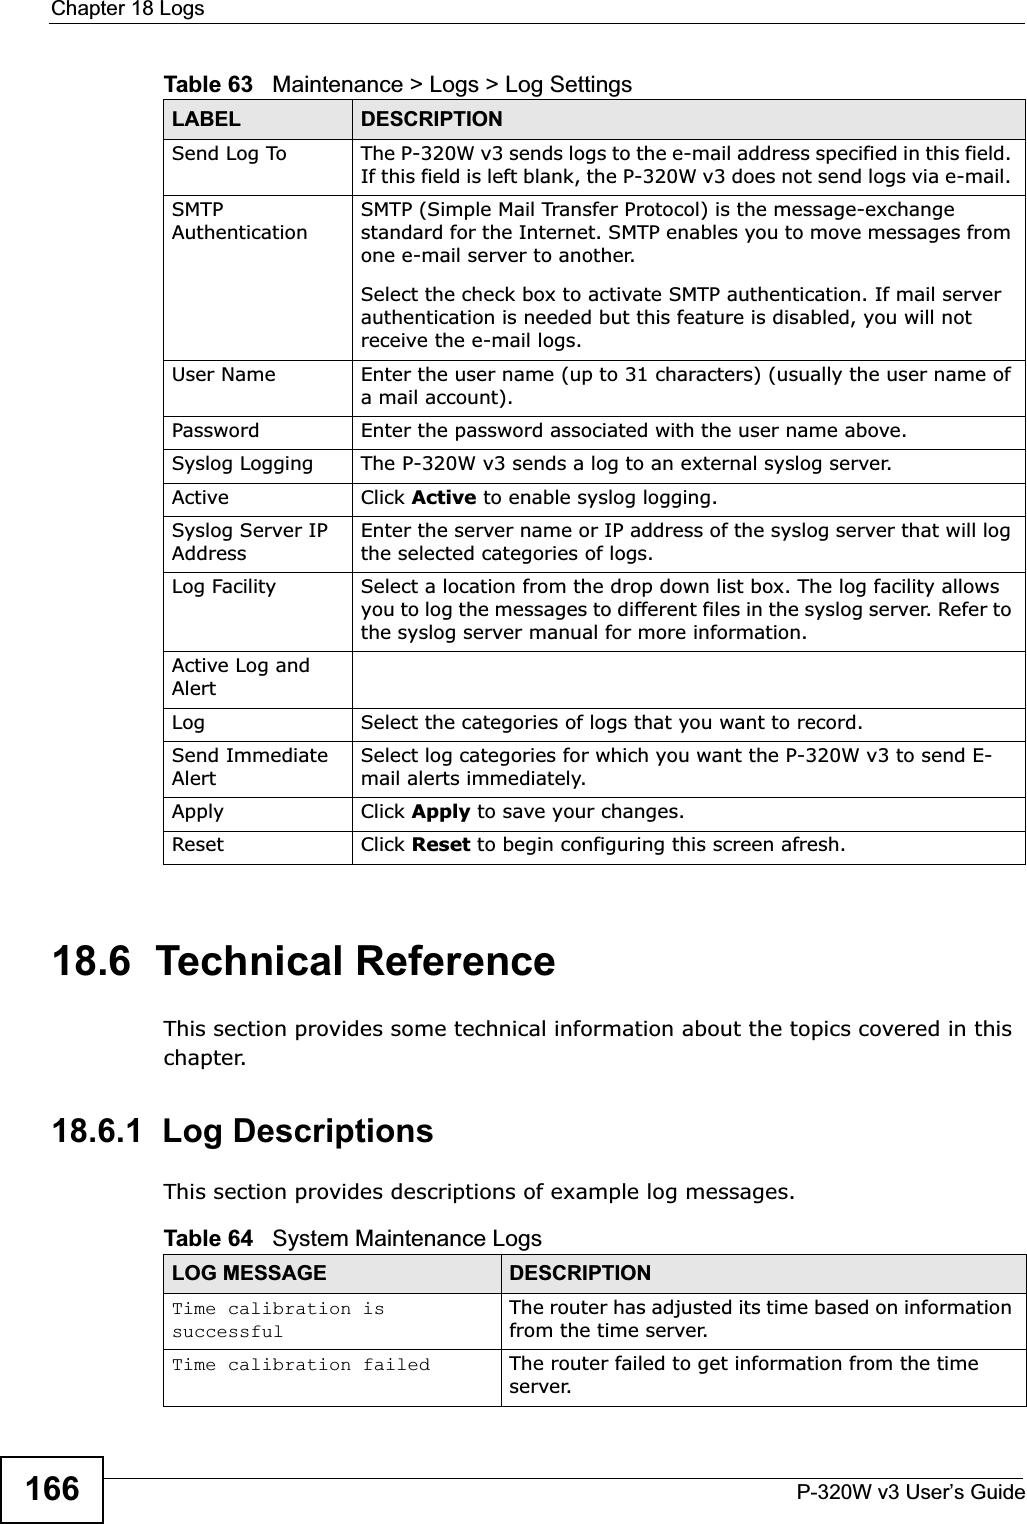 Chapter 18 LogsP-320W v3 User’s Guide16618.6  Technical ReferenceThis section provides some technical information about the topics covered in this chapter.18.6.1  Log DescriptionsThis section provides descriptions of example log messages. Send Log To  The P-320W v3 sends logs to the e-mail address specified in this field. If this field is left blank, the P-320W v3 does not send logs via e-mail. SMTP AuthenticationSMTP (Simple Mail Transfer Protocol) is the message-exchange standard for the Internet. SMTP enables you to move messages from one e-mail server to another.Select the check box to activate SMTP authentication. If mail server authentication is needed but this feature is disabled, you will not receive the e-mail logs.User Name Enter the user name (up to 31 characters) (usually the user name of a mail account).Password Enter the password associated with the user name above.Syslog Logging The P-320W v3 sends a log to an external syslog server.Active Click Active to enable syslog logging. Syslog Server IP AddressEnter the server name or IP address of the syslog server that will log the selected categories of logs. Log Facility  Select a location from the drop down list box. The log facility allows you to log the messages to different files in the syslog server. Refer to the syslog server manual for more information. Active Log and AlertLog Select the categories of logs that you want to record.Send Immediate AlertSelect log categories for which you want the P-320W v3 to send E-mail alerts immediately. Apply Click Apply to save your changes. Reset  Click Reset to begin configuring this screen afresh. Table 63   Maintenance &gt; Logs &gt; Log SettingsLABEL DESCRIPTIONTable 64   System Maintenance LogsLOG MESSAGE DESCRIPTIONTime calibration is successfulThe router has adjusted its time based on information from the time server.Time calibration failed The router failed to get information from the time server.